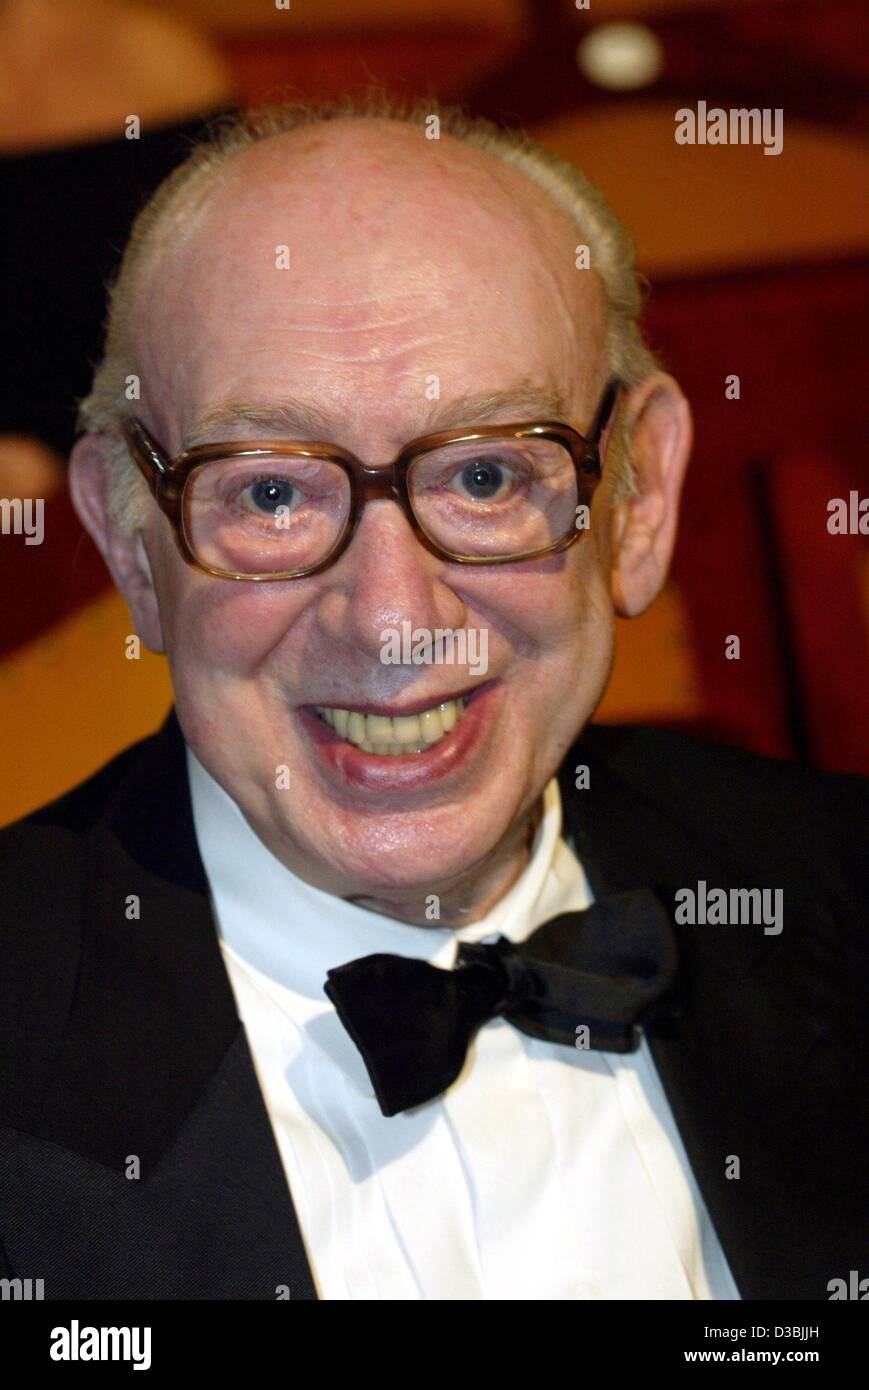 (dpa) - German actor Horst Tappert, who played Inspector Derrick from 1974 until 1998, is photographed at the Bayerischer Fernsehpreis award (Bavarian TV prize) in Munich, 23 May 2003. He won the special award for his fine character performance in the TV crime series 'Derrick'. When he was presented Stock Photo